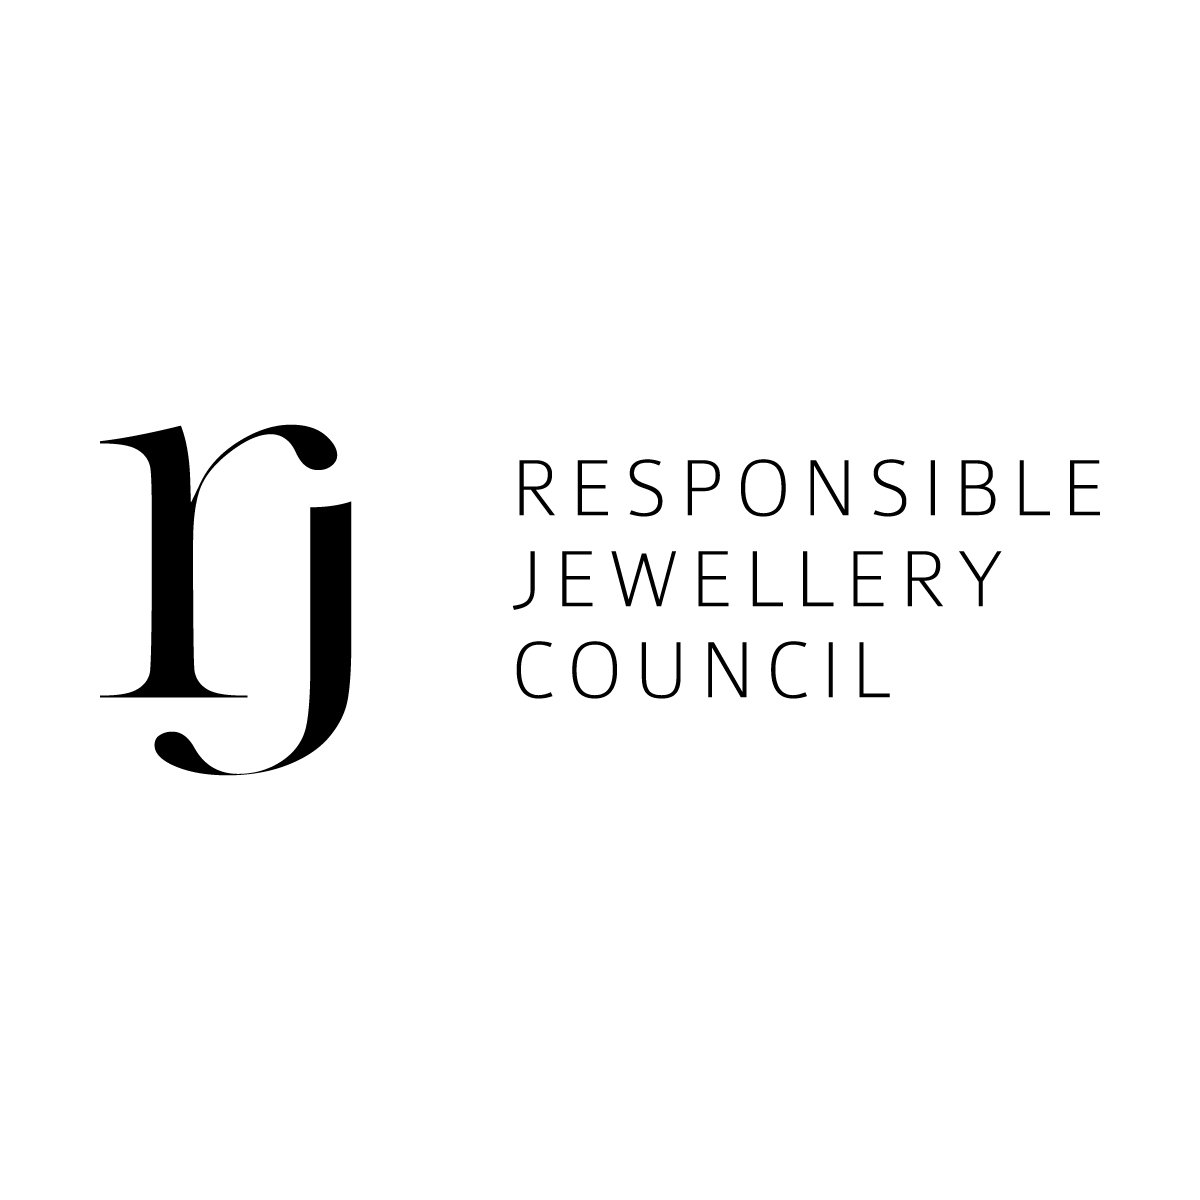 Responsible Jewellery Council (RJC) The Good Goods